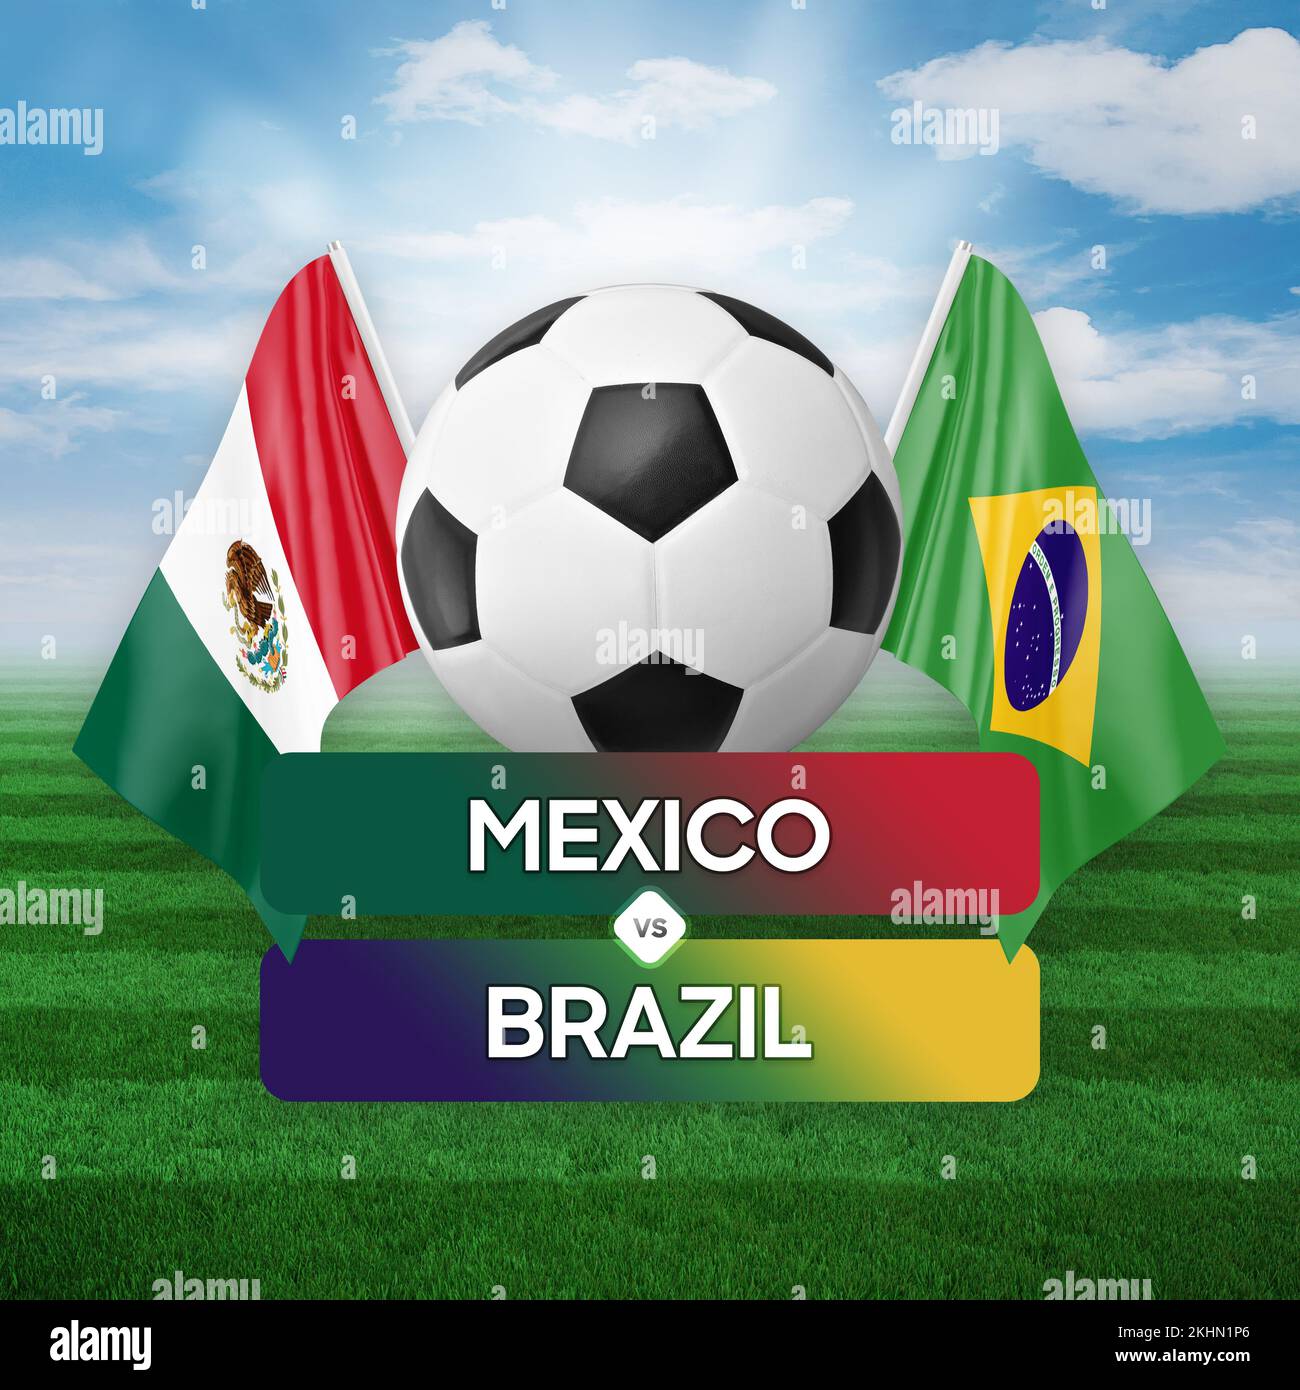 Mexico vs Brazil national teams soccer football match competition concept. Stock Photo